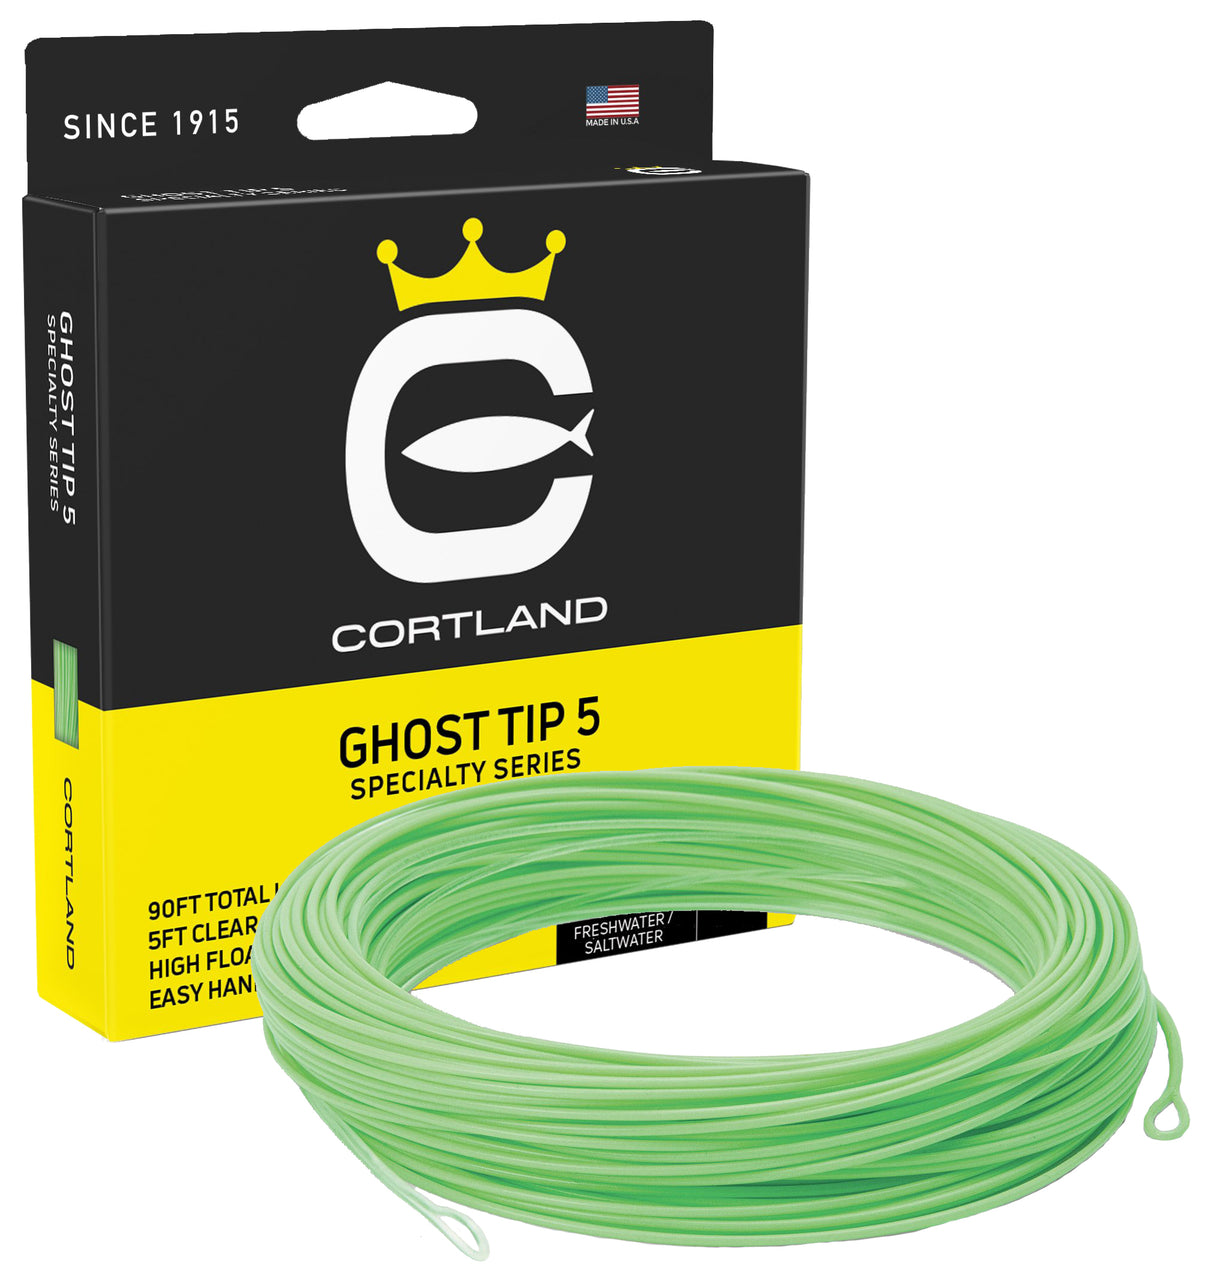 Cortland Ghost Tip 5 Lines - NEW